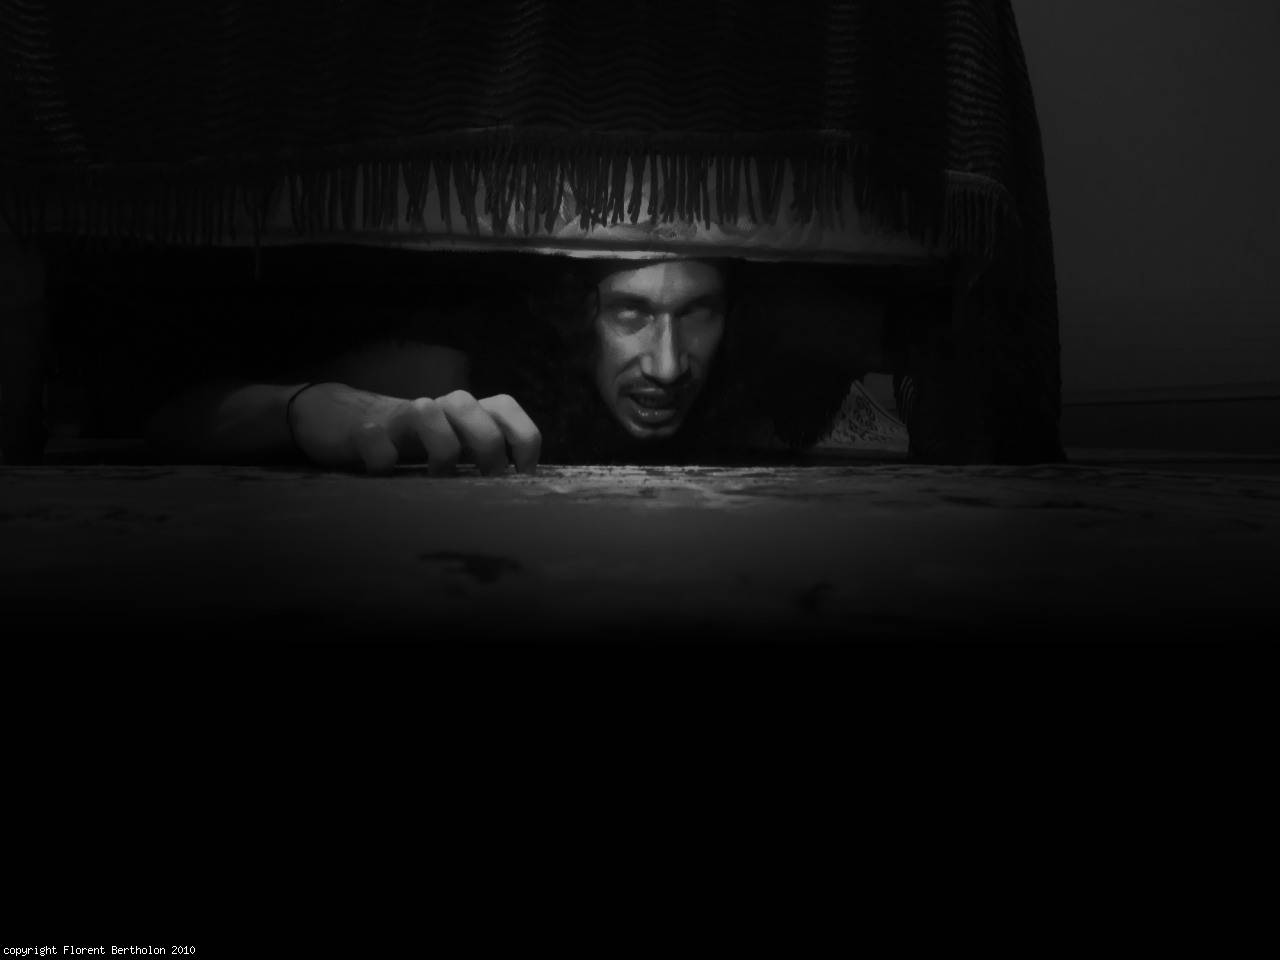 Photos: Under the bed ...